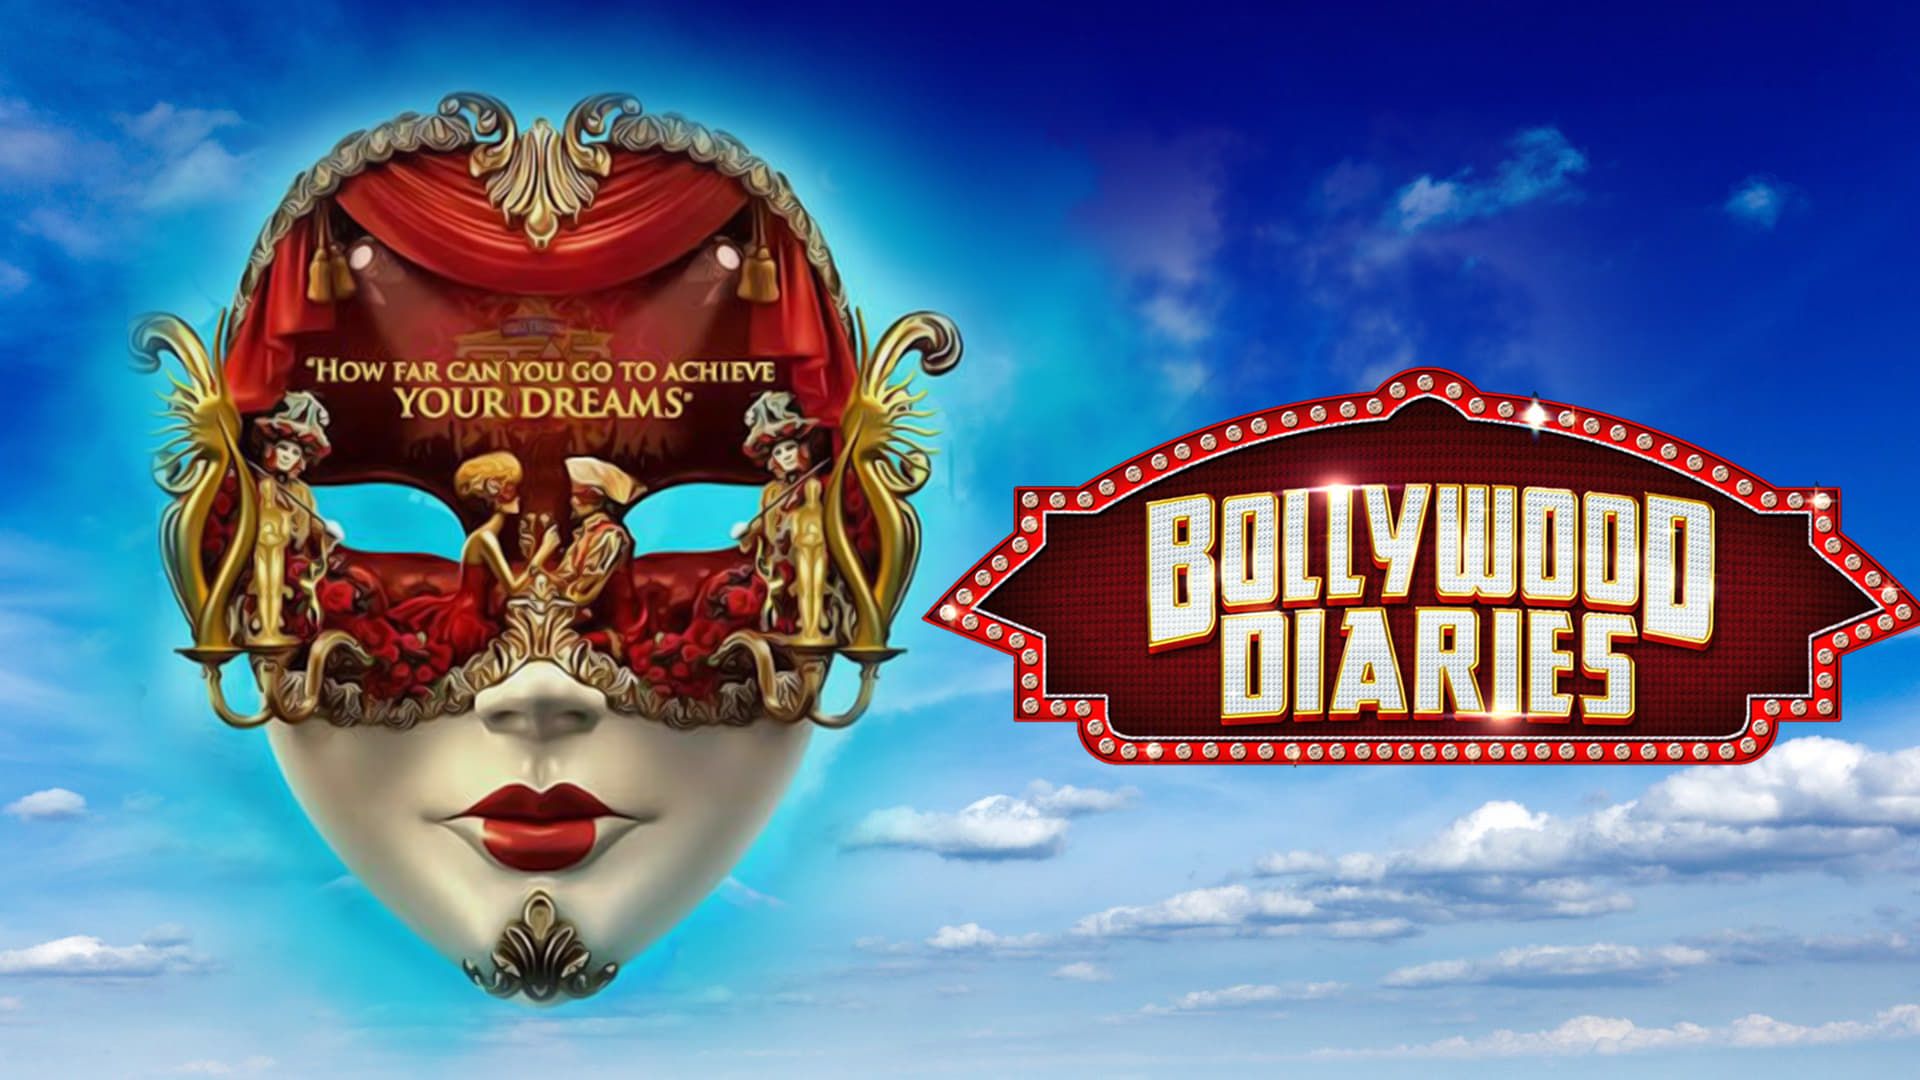 Bollywood Diaries background